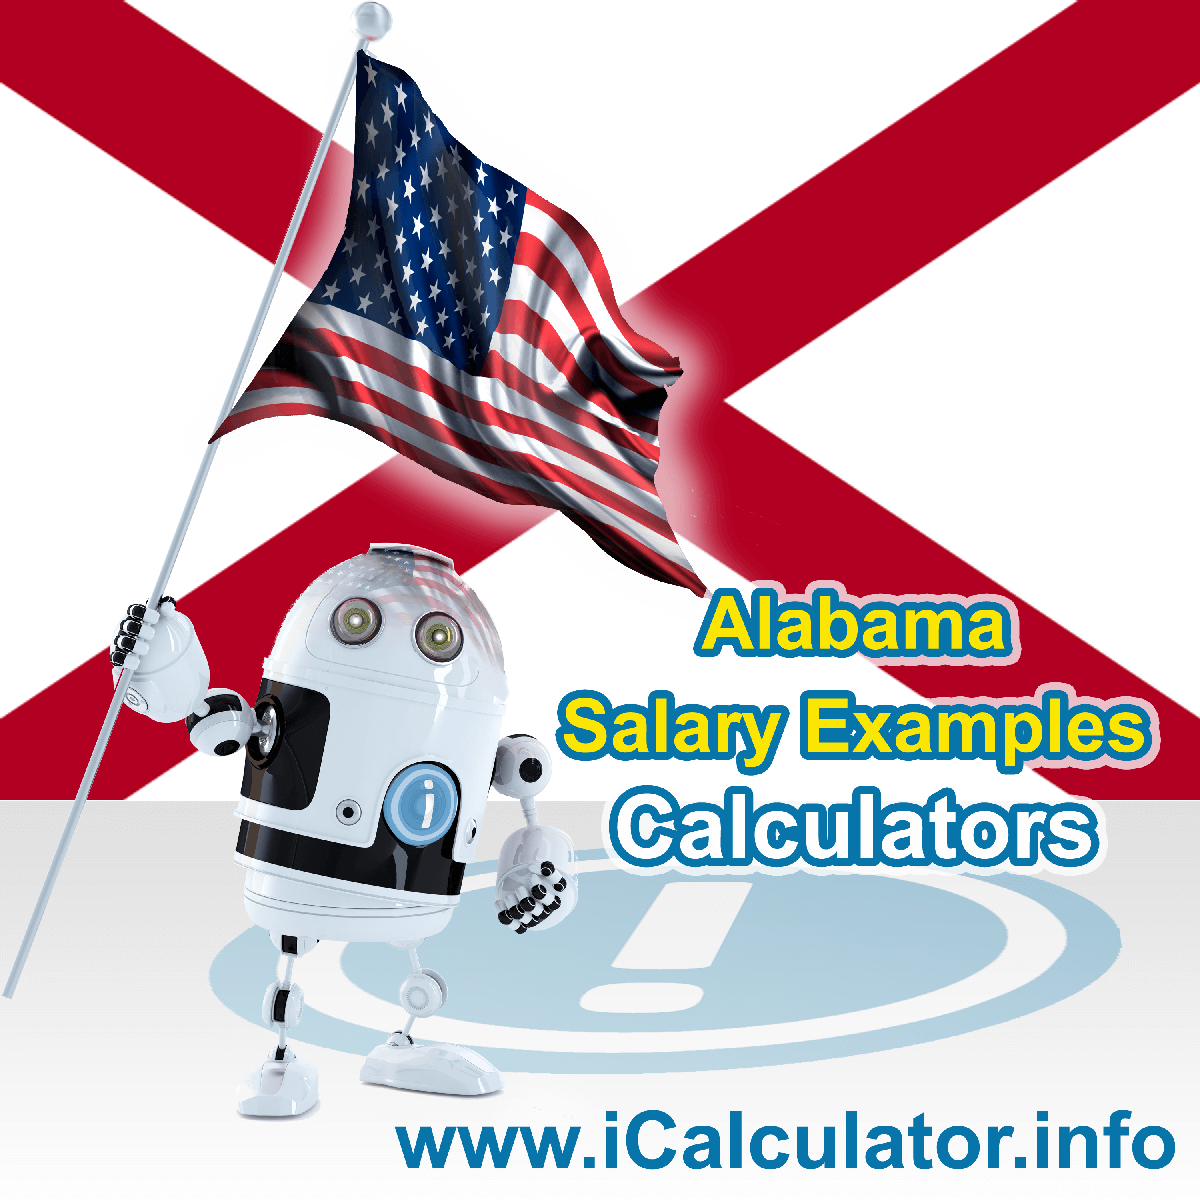 Alabama Salary Example for $ 60,000.00 in 2023 | iCalculator™ | $ 60,000.00 salary example for employee and employer paying Alabama State tincome taxes. Detailed salary after tax calculation including Alabama State Tax, Federal State Tax, Medicare Deductions, Social Security, Capital Gains and other income tax and salary deductions complete with supporting Alabama state tax tables 